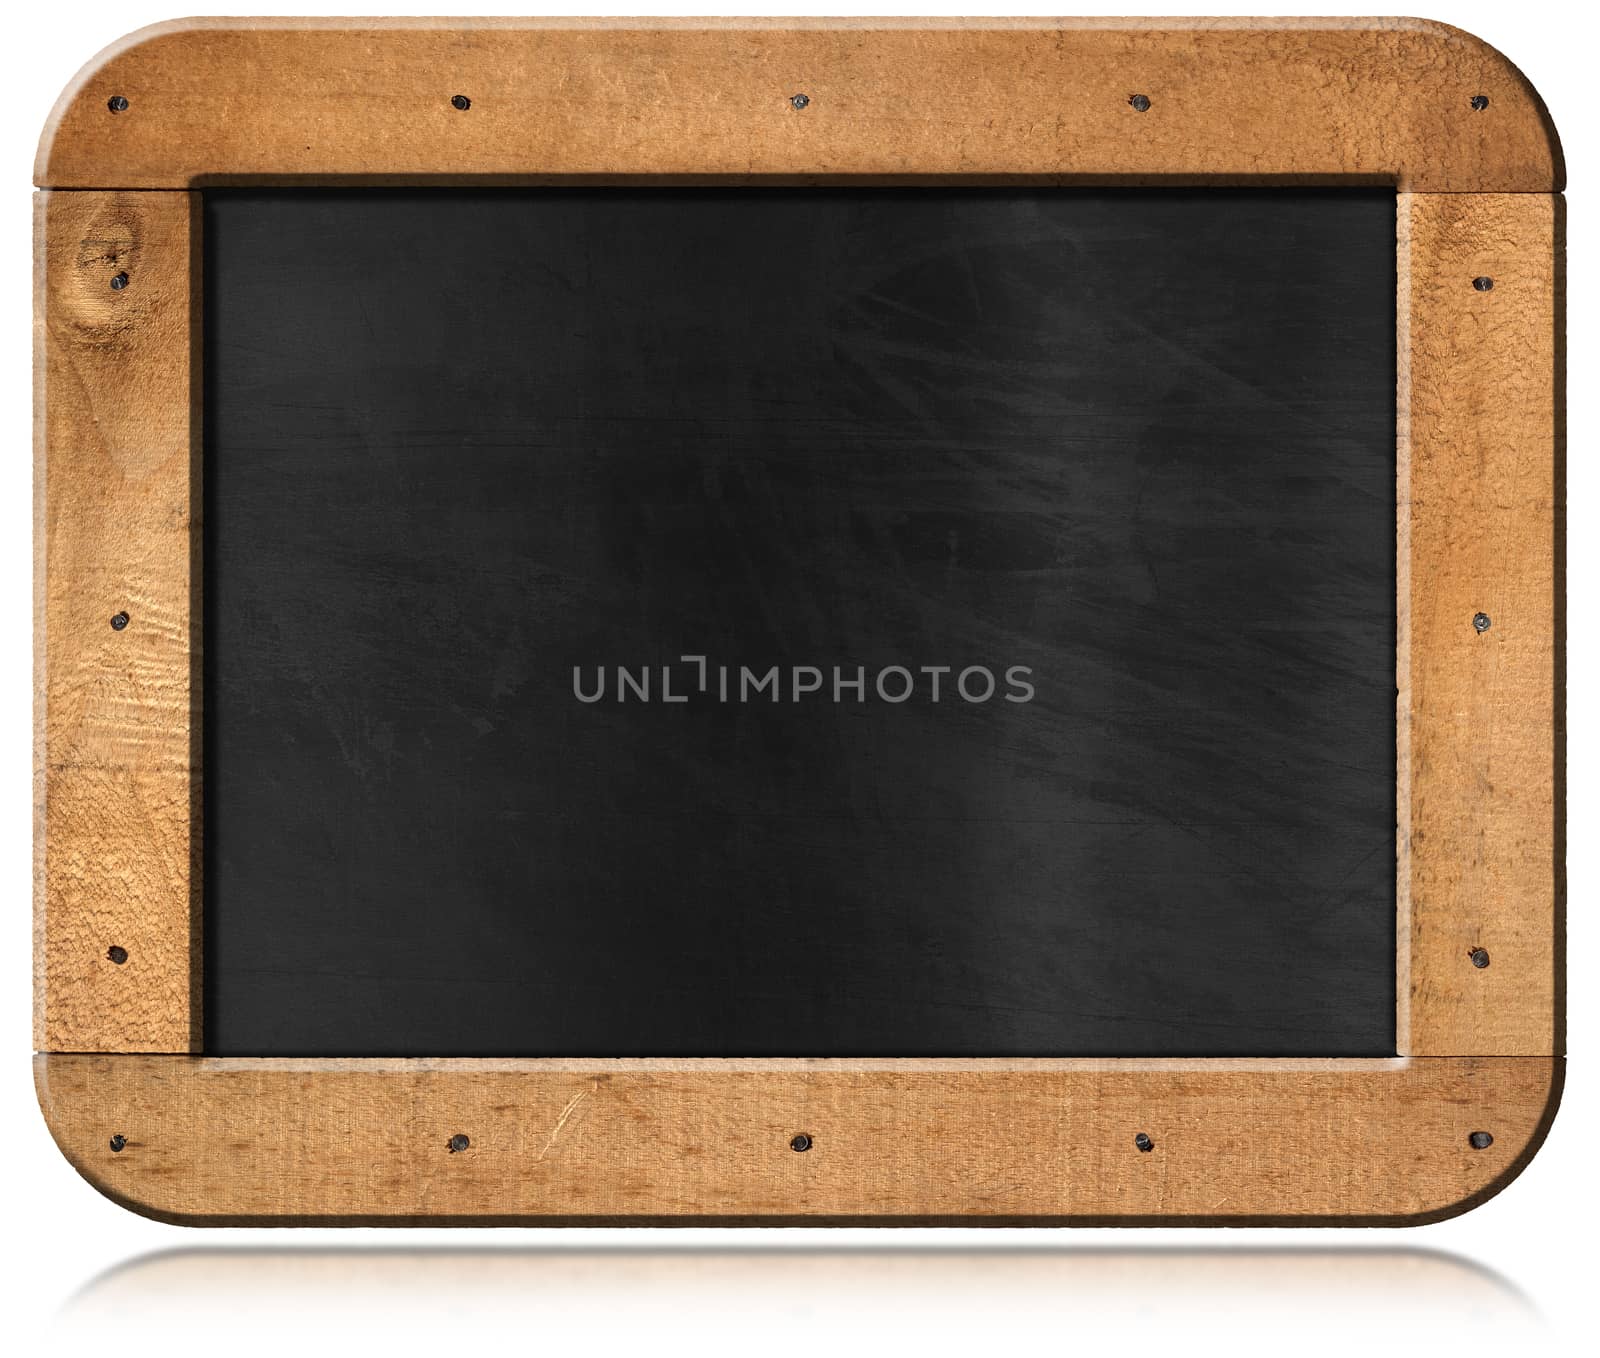 Old blank blackboard with wooden rectangular frame and nails. Isolated on white background